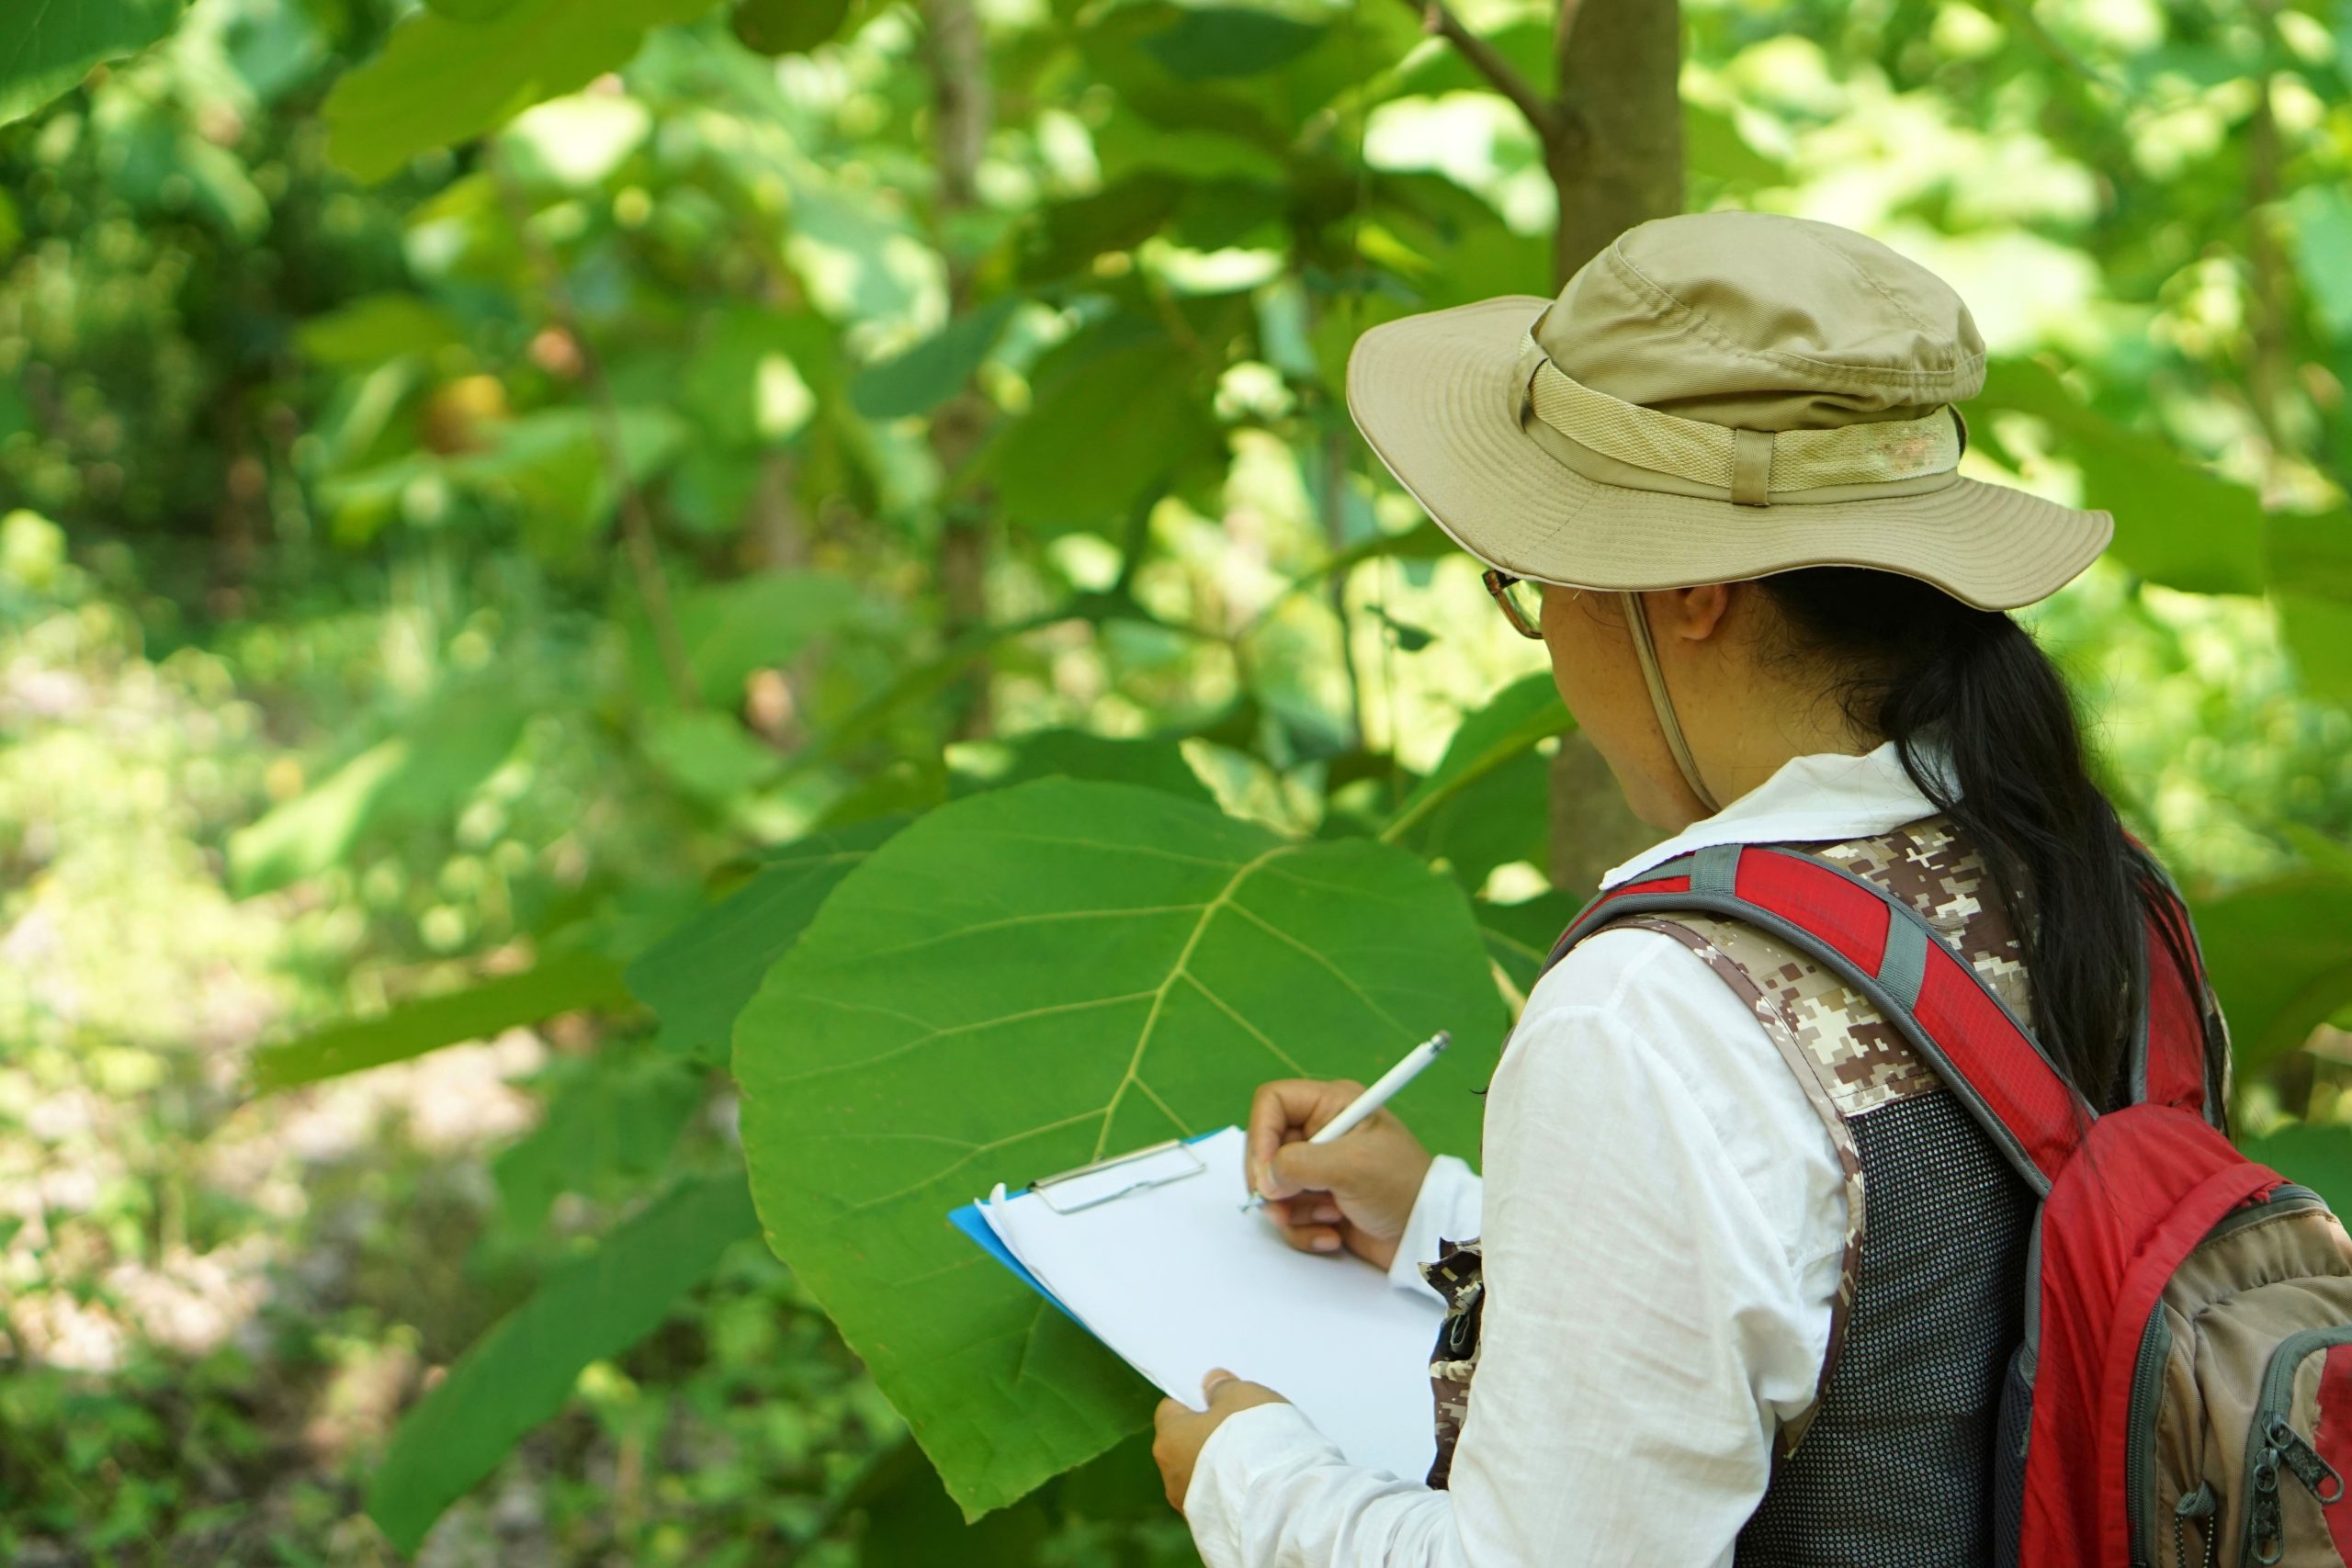 Asian female botanist is at the forest to survey and collect information about botanical plants. Concept field research outdoor.